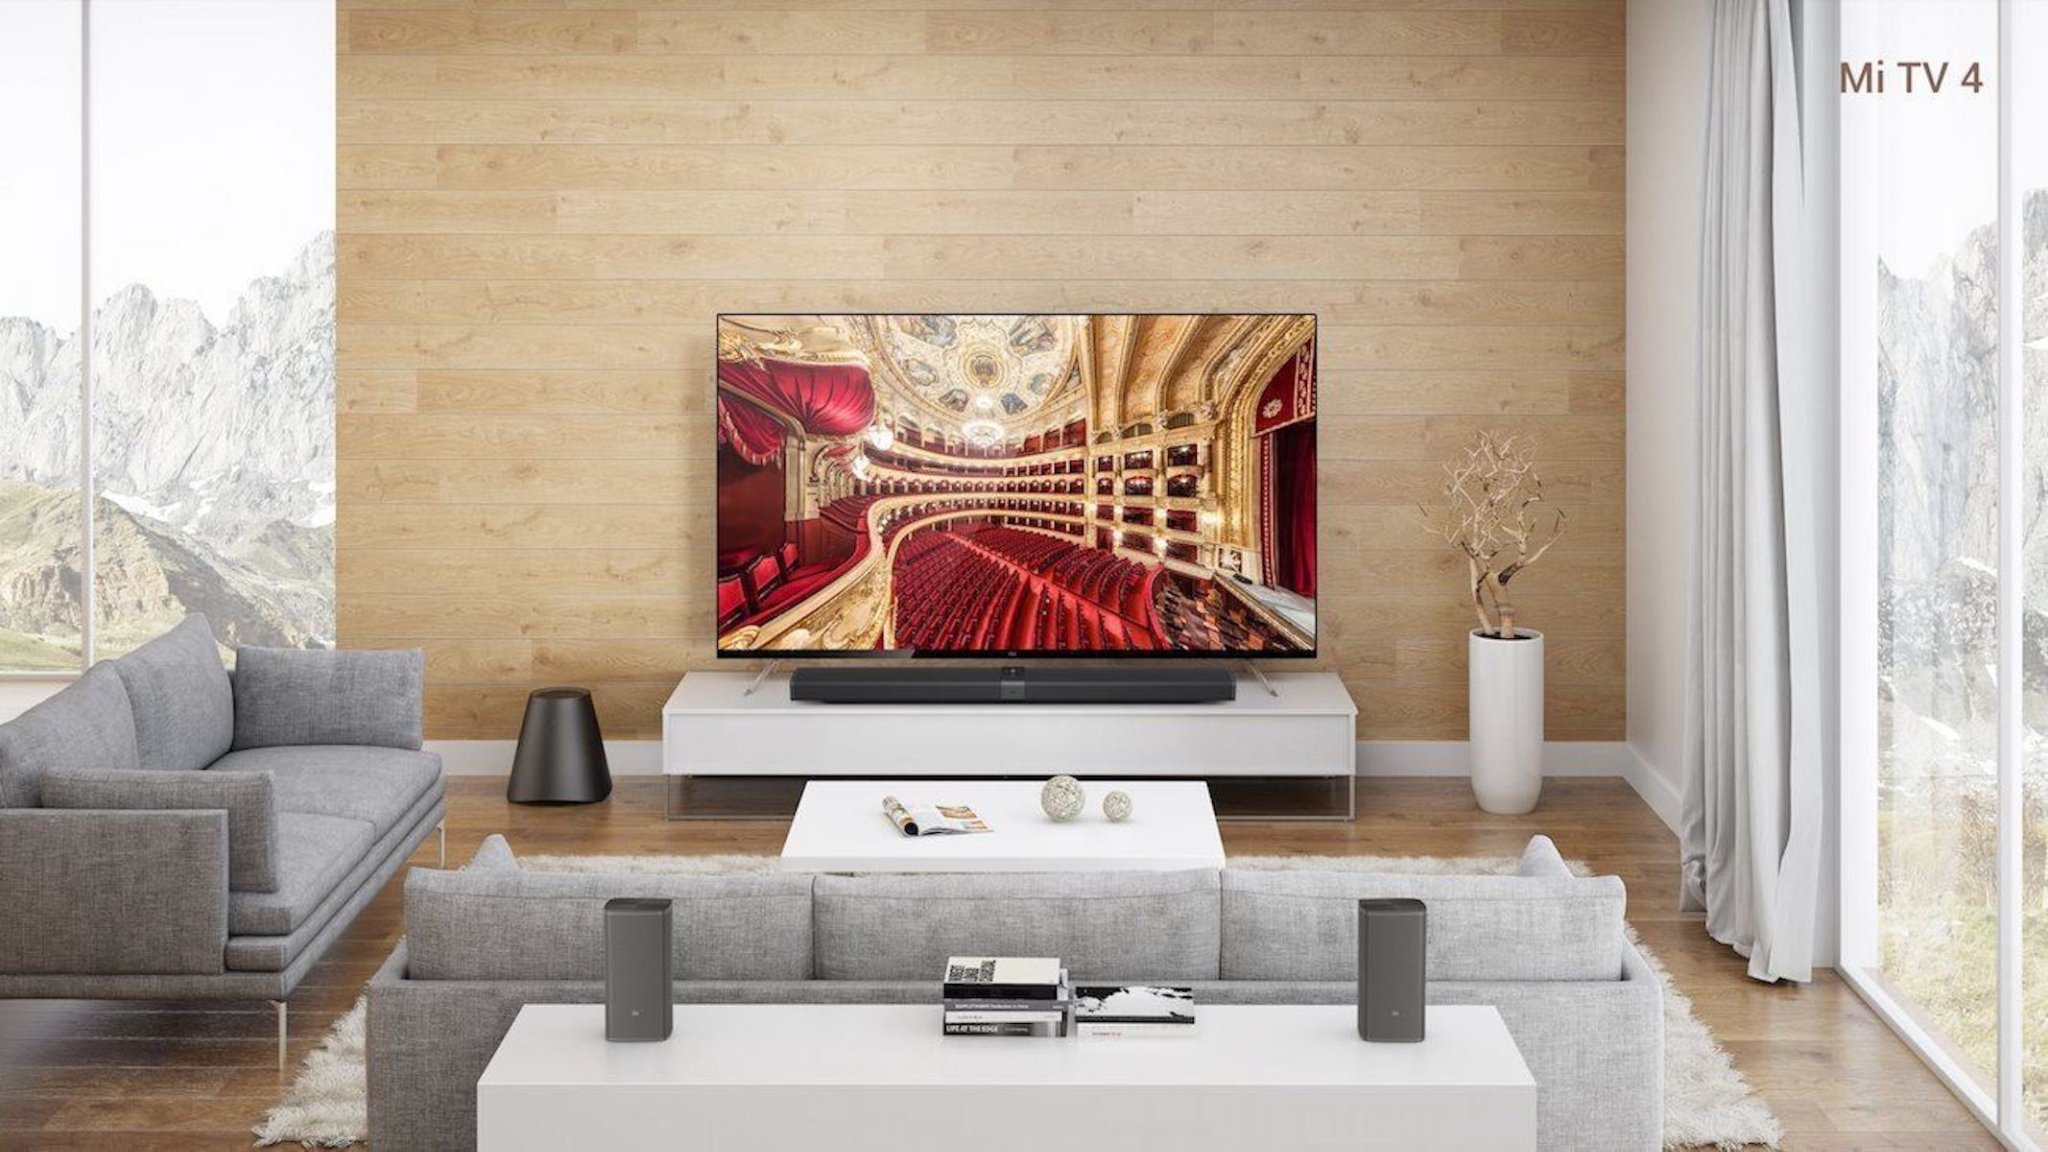 Best Dolby Atmos TVs for your home theater setup